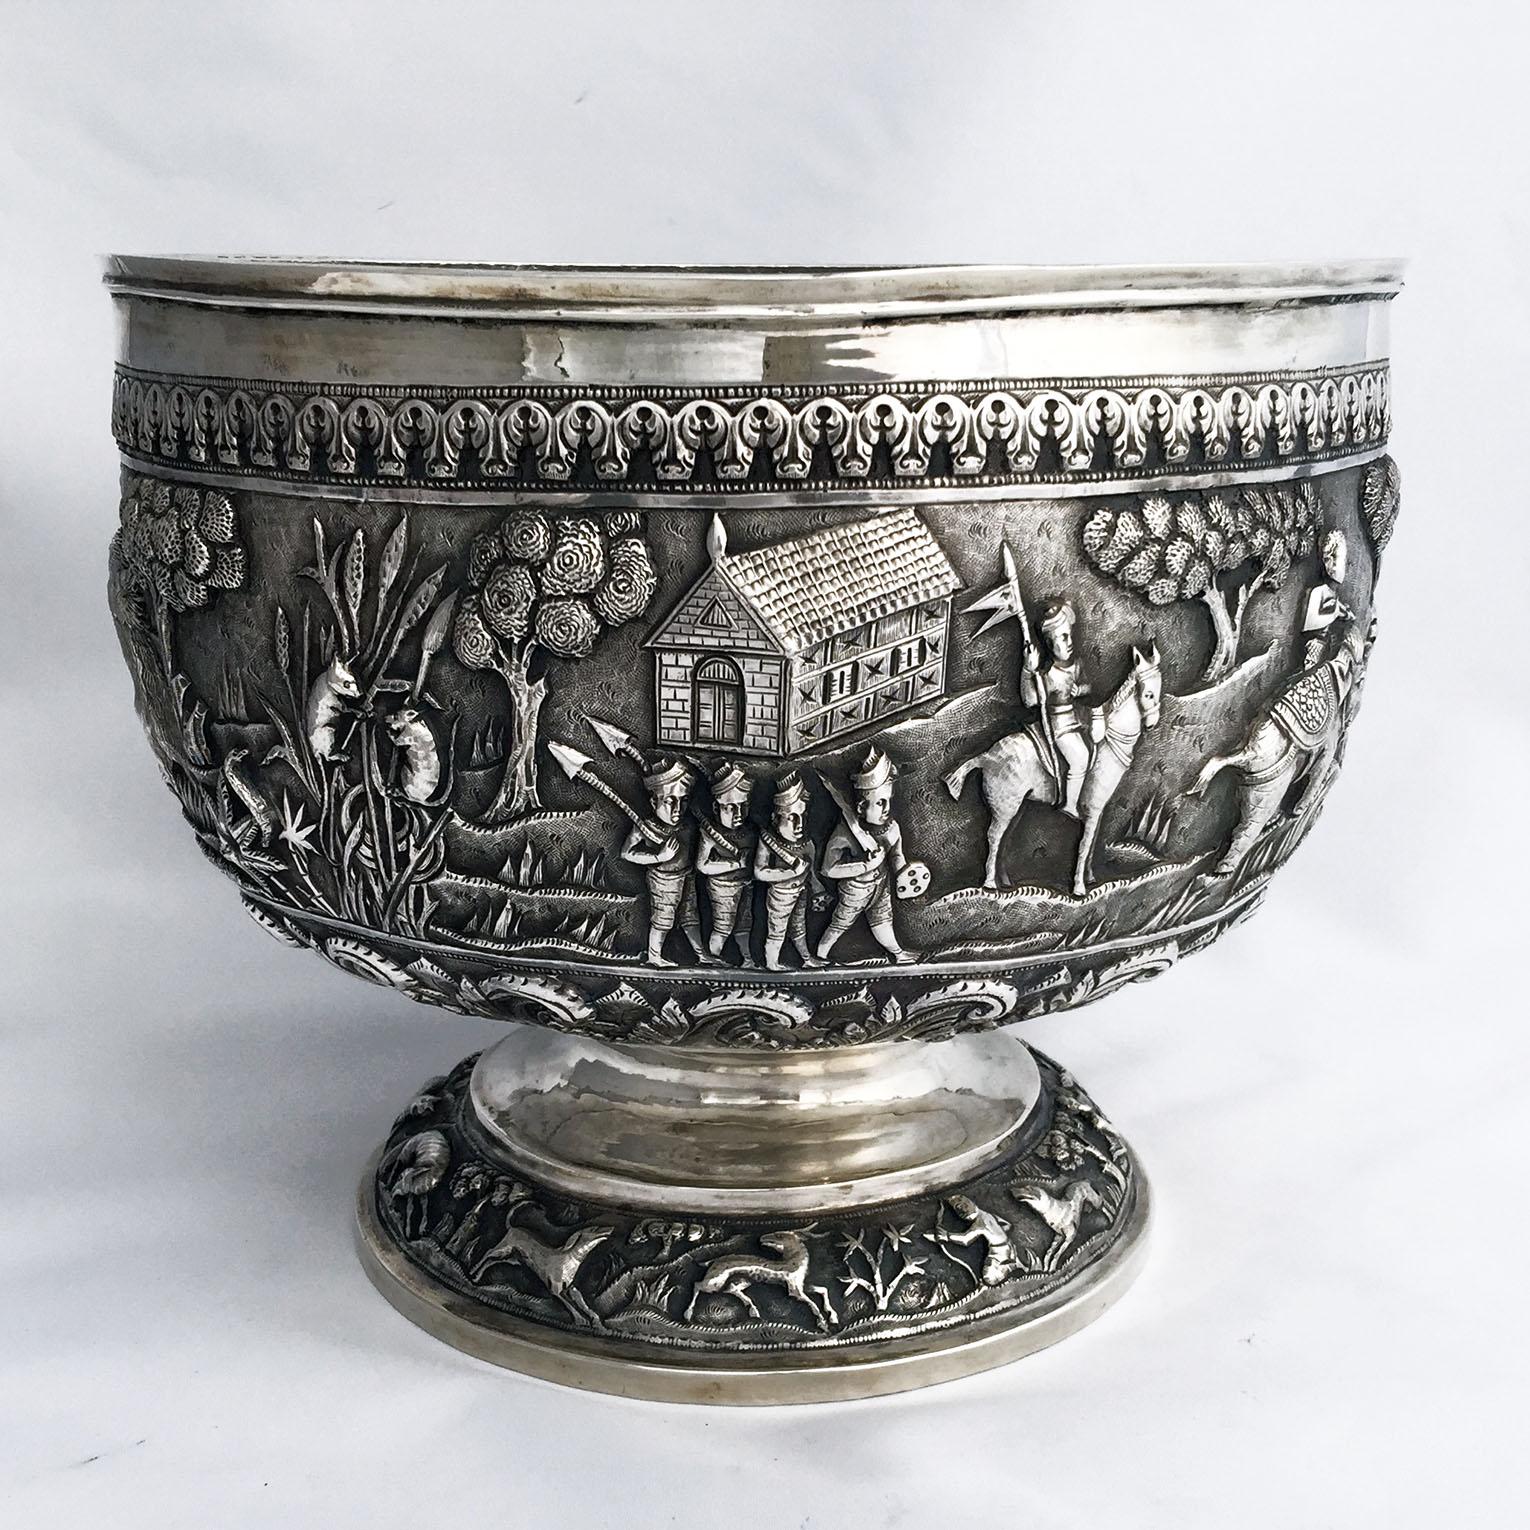 British Colonial Indian Colonial Presentation Bowl For Sale